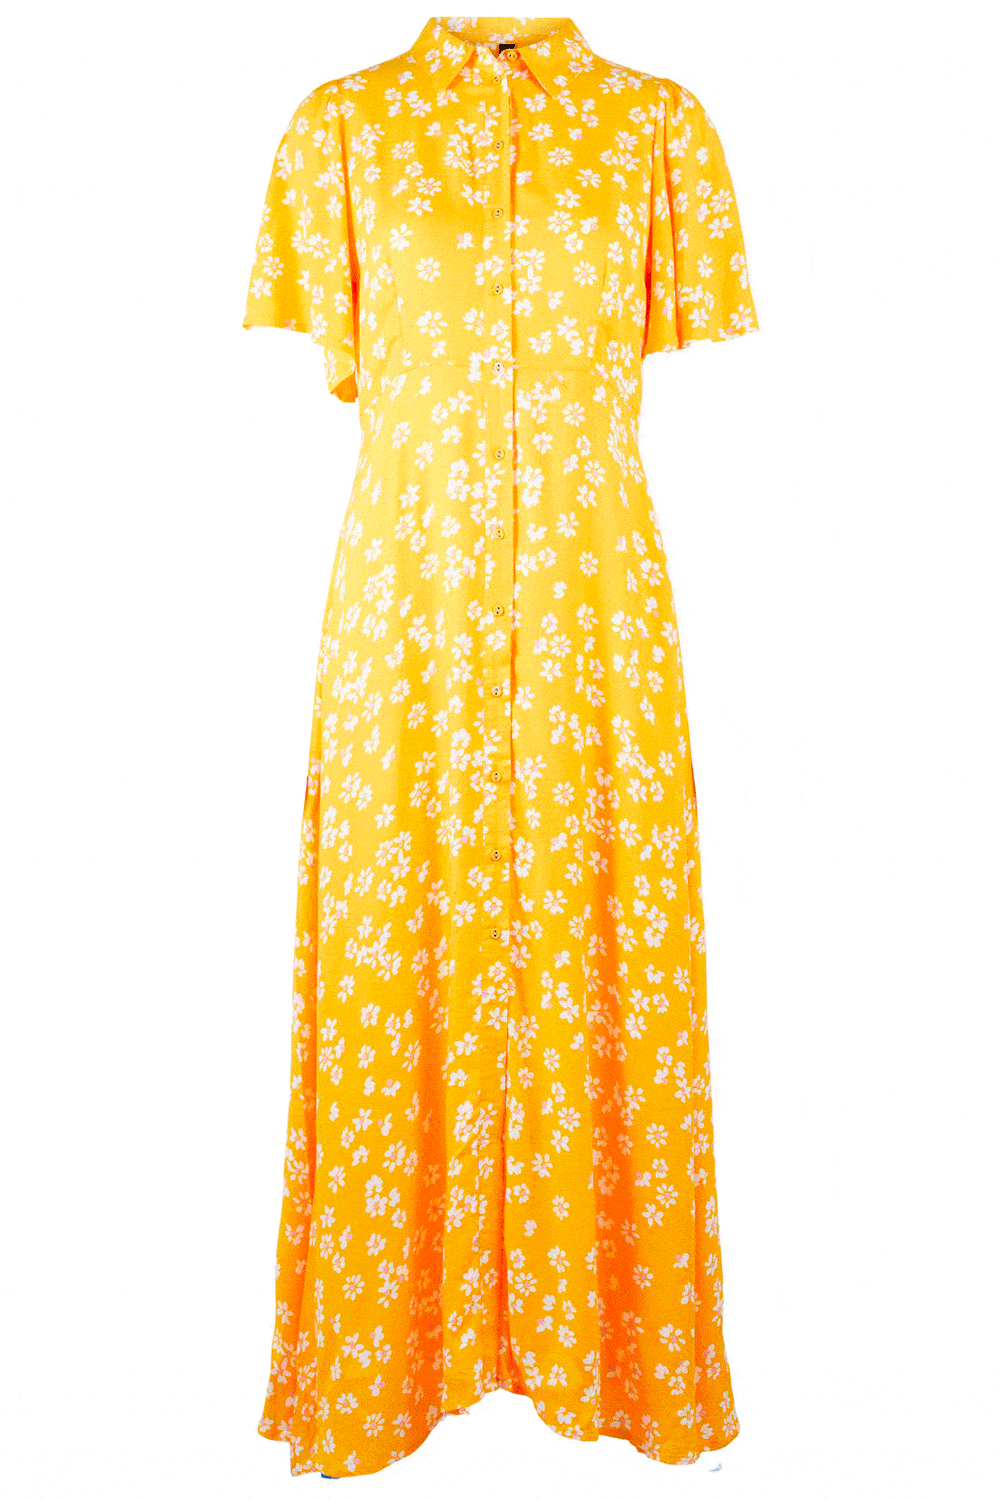 Y.A.S - YasLimo 2/4 Ankle Shirt Dress - Radiant Yellow Kjoler 